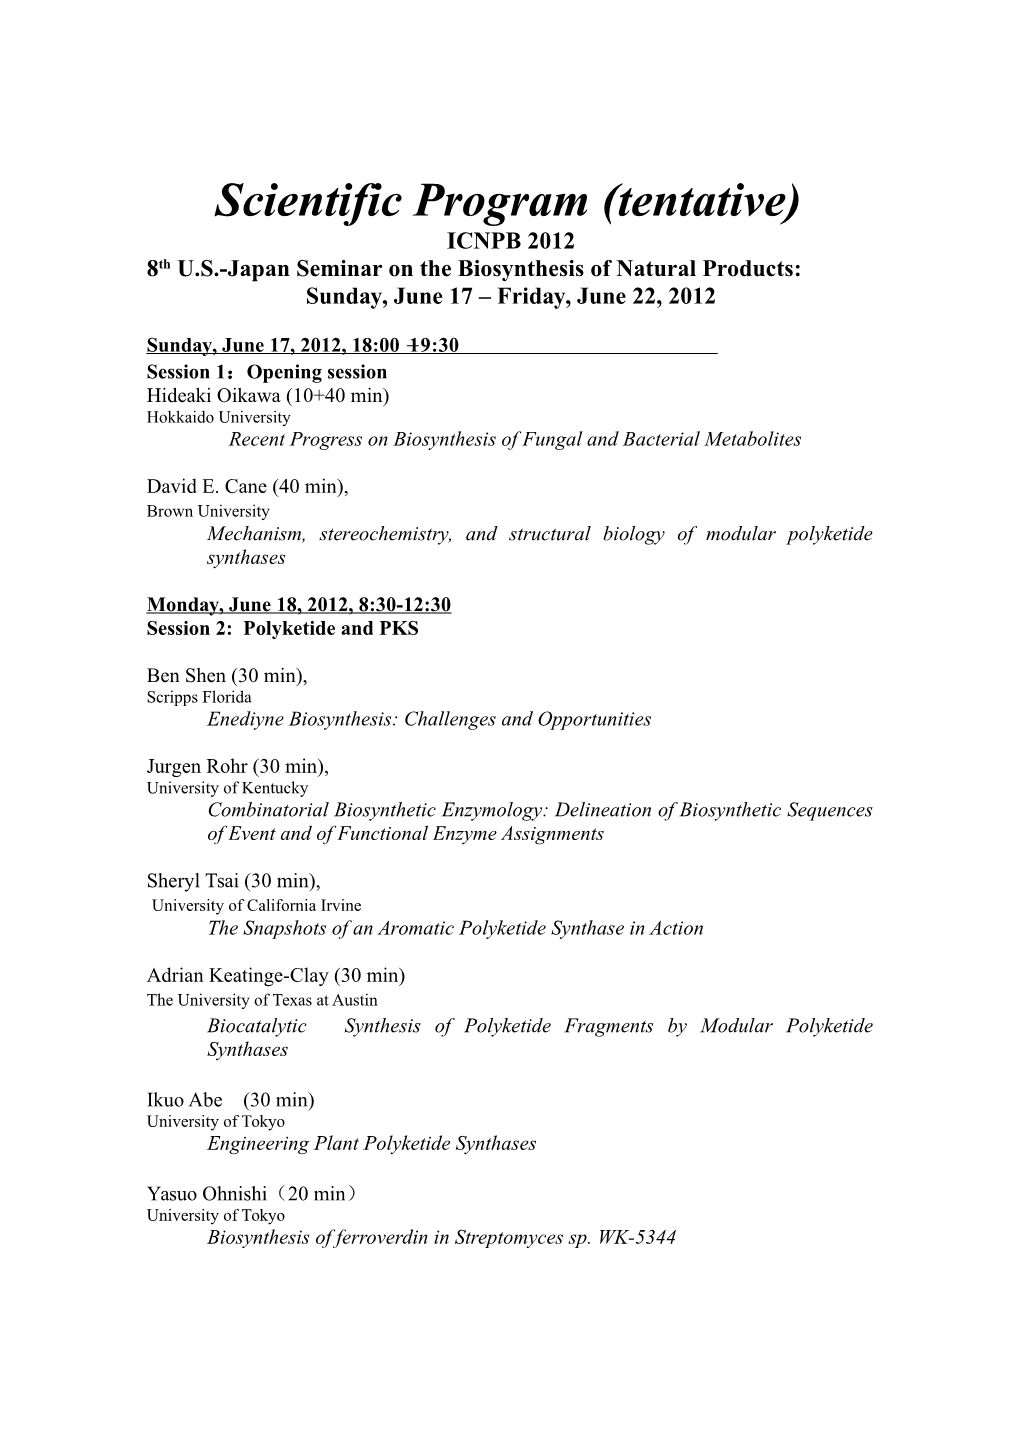 8Th U.S.-Japan Seminar on the Biosynthesis of Natural Products